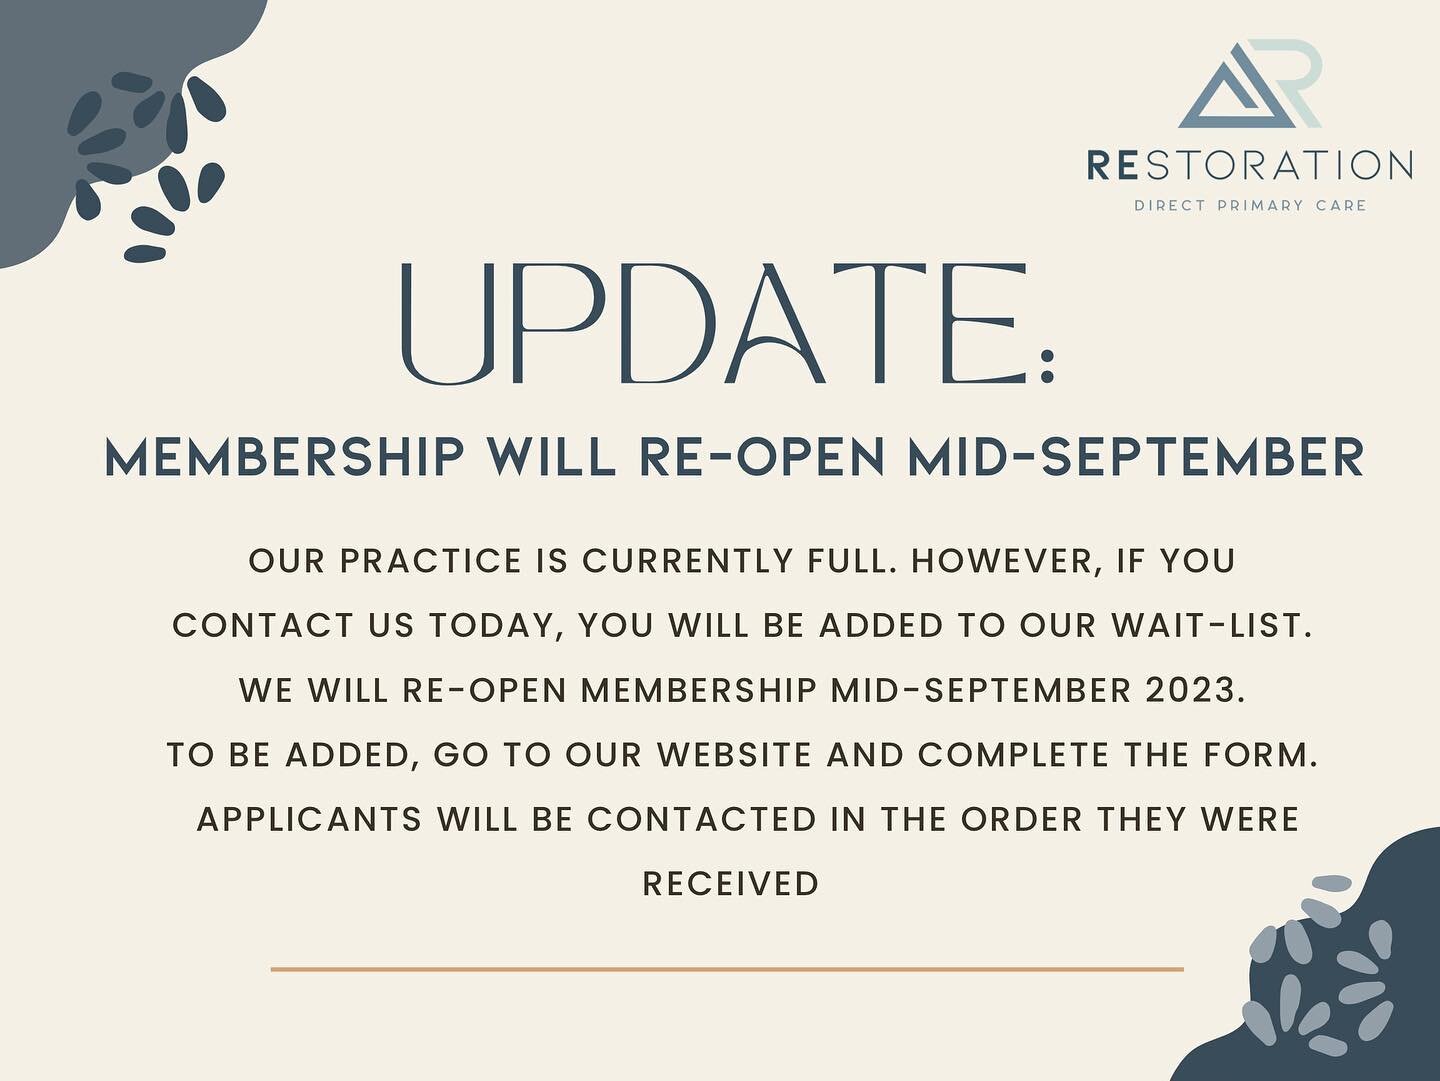 GREAT NEWS!

Membership will re-open mid-September!

Applicants will be contacted in the ordered they were received.

To be added to the wait list, fill out the form on our website. 

Link is in the comments! 🎉